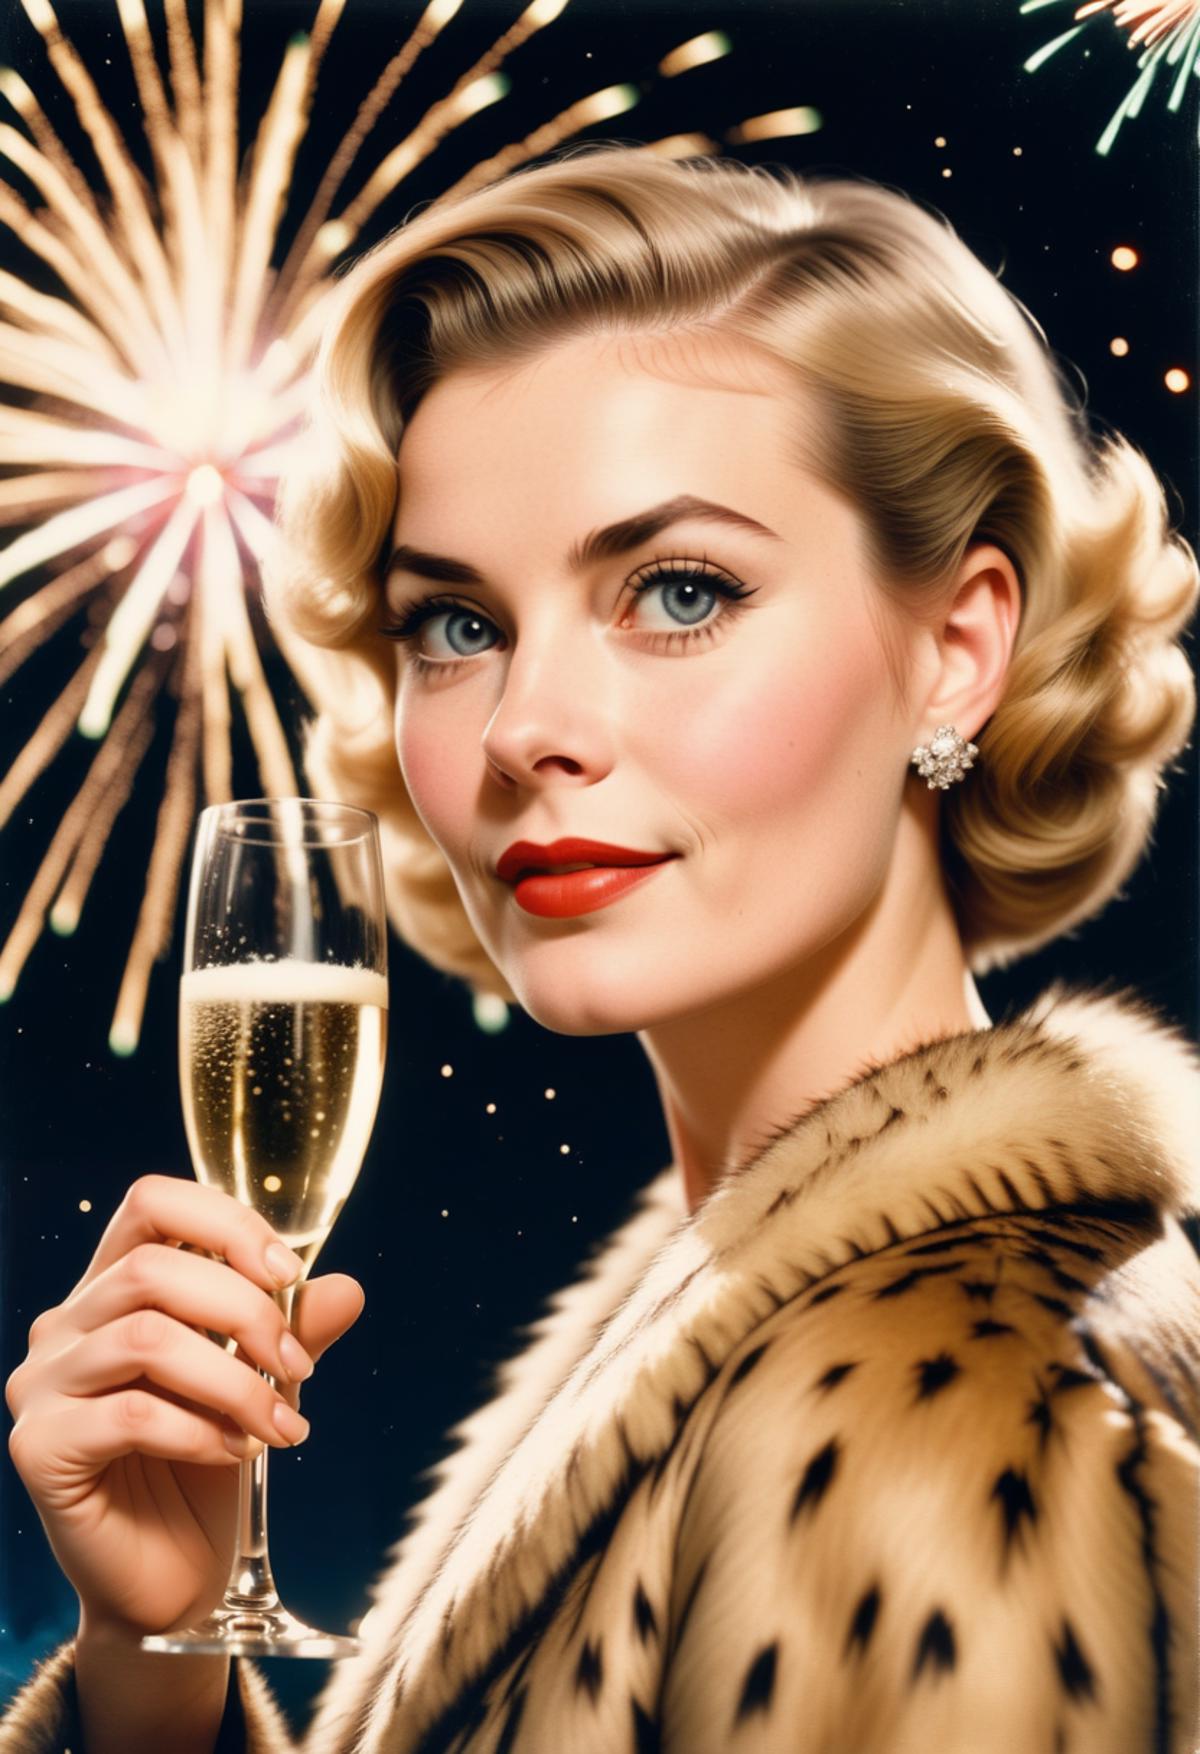 vintage polaroid, up close photo of a beautiful woman standing in front of fireworks at night, holding a champagne flute, ...